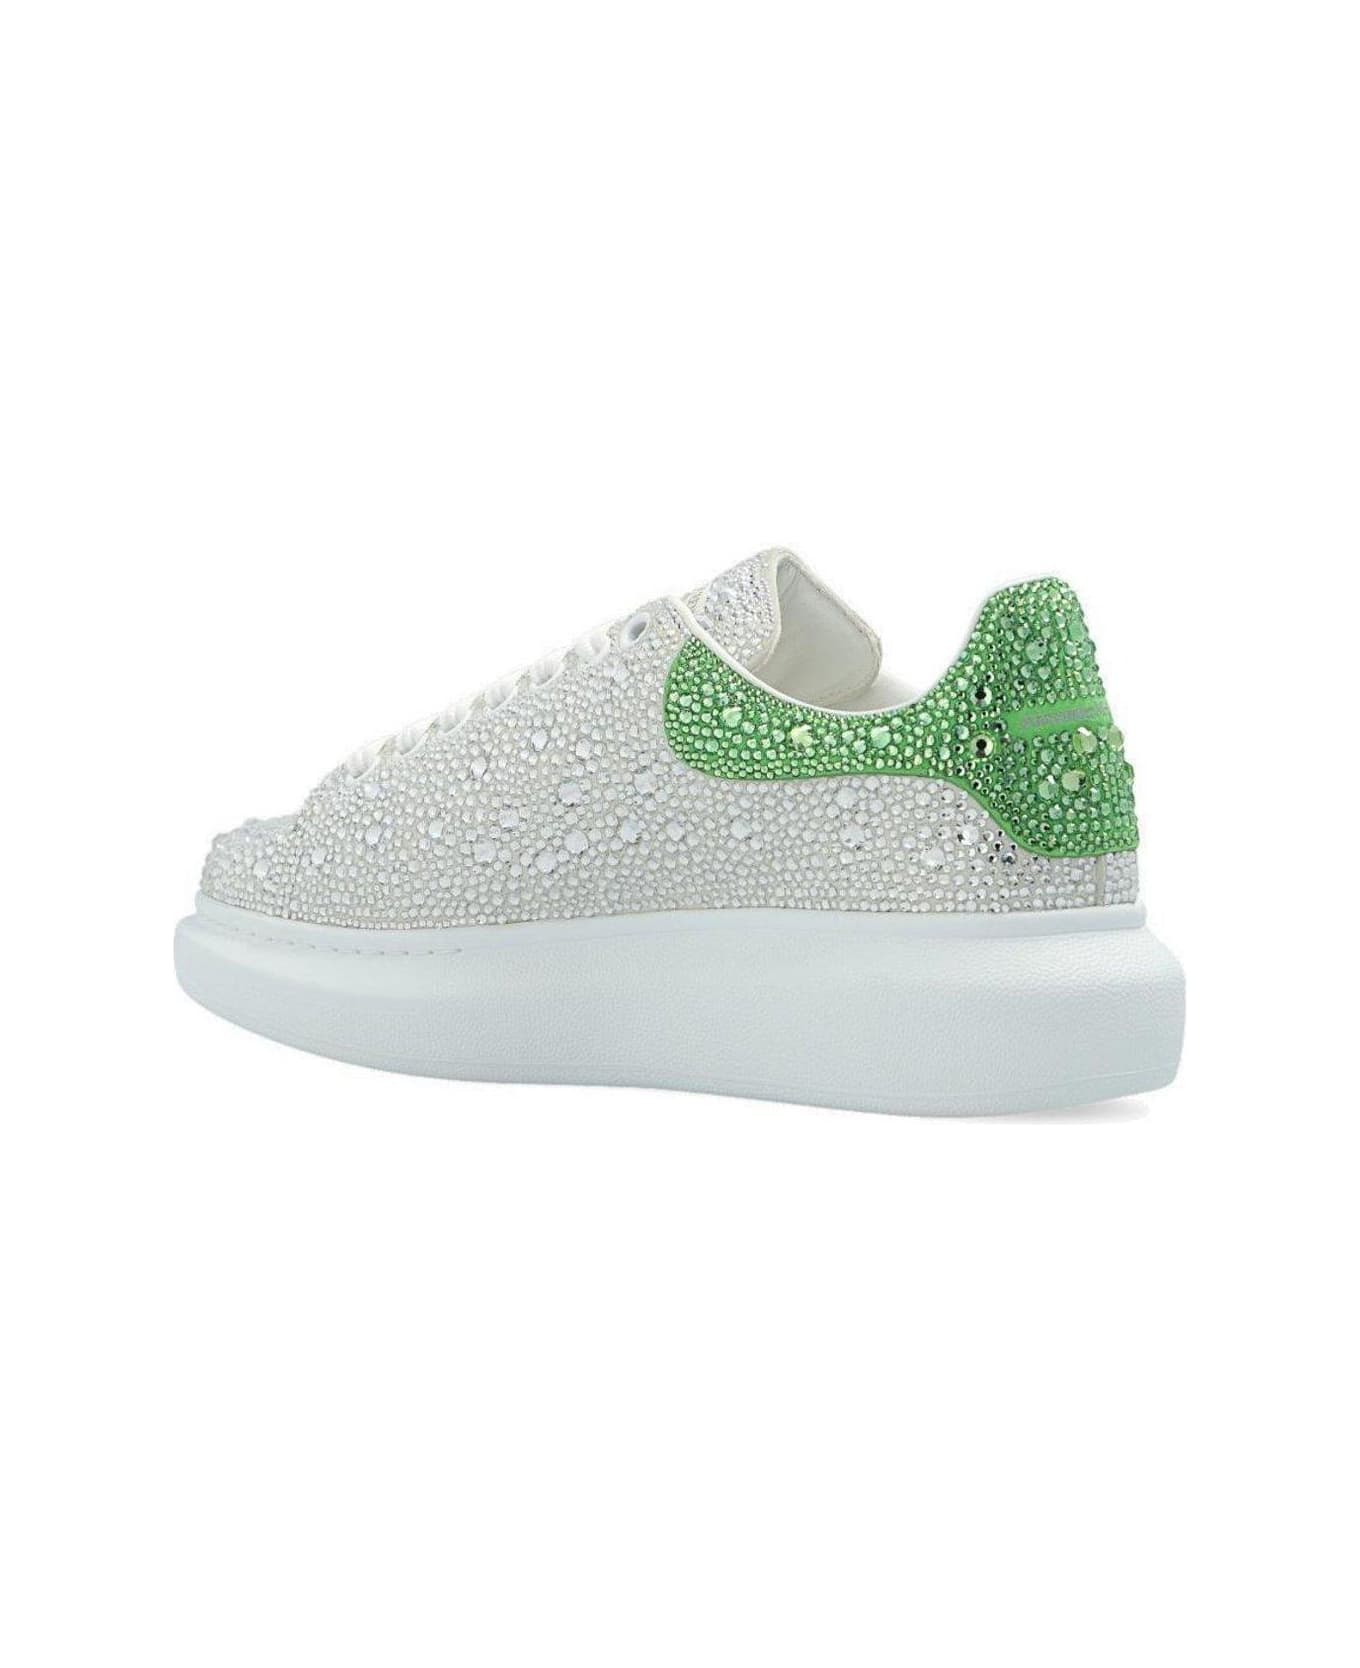 Alexander McQueen Embellished Lace-up Sneakers スニーカー